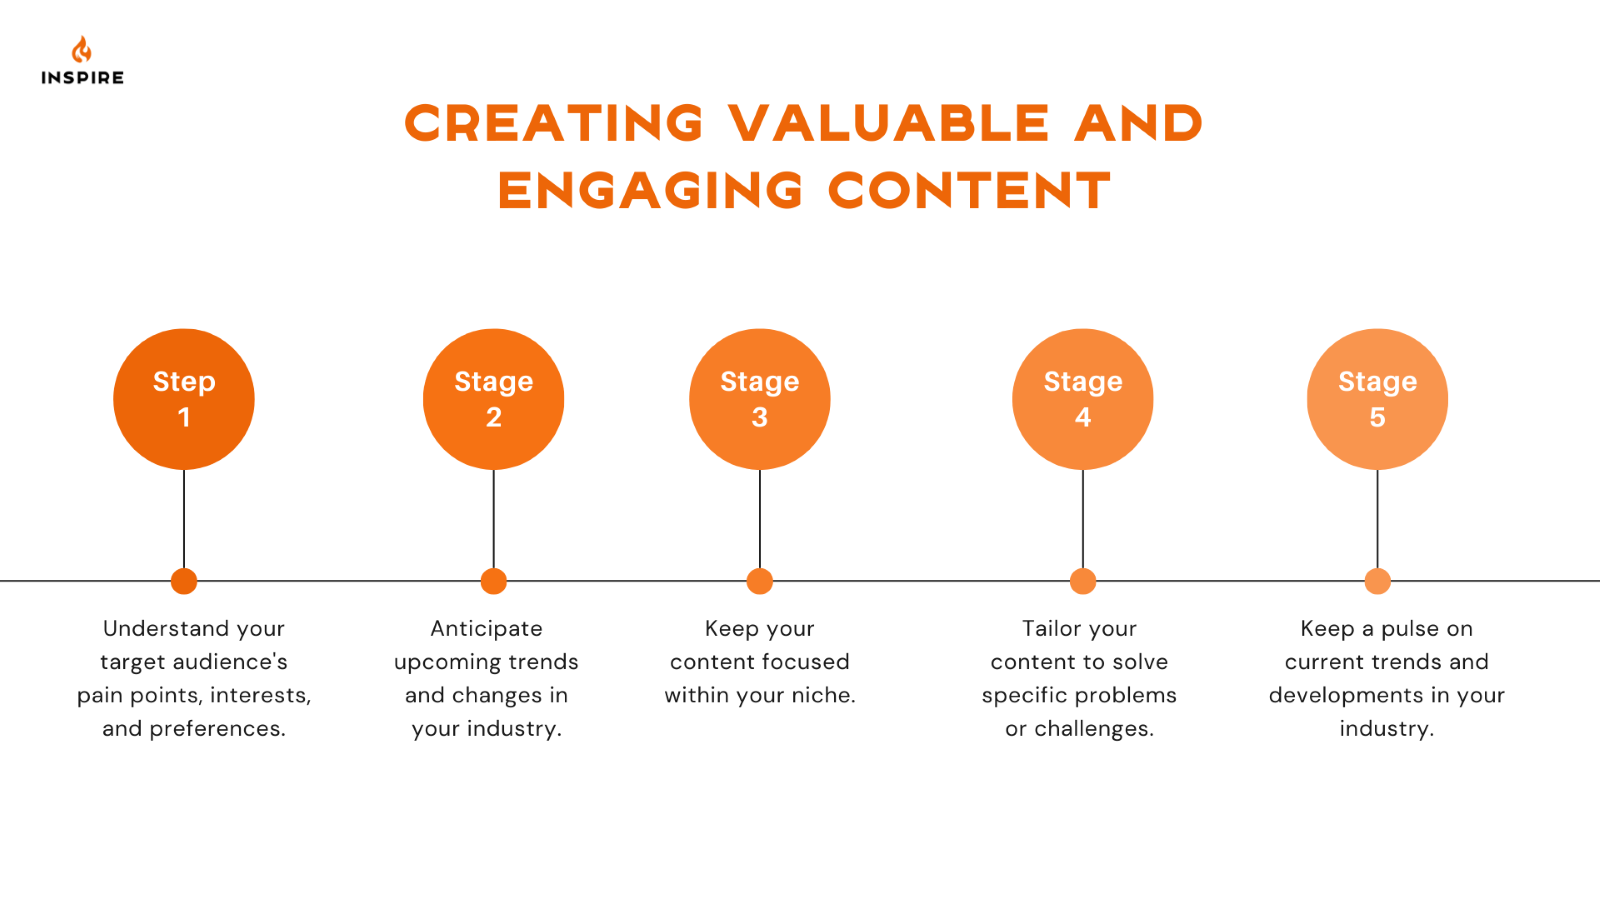 Creating valuable and engaging content